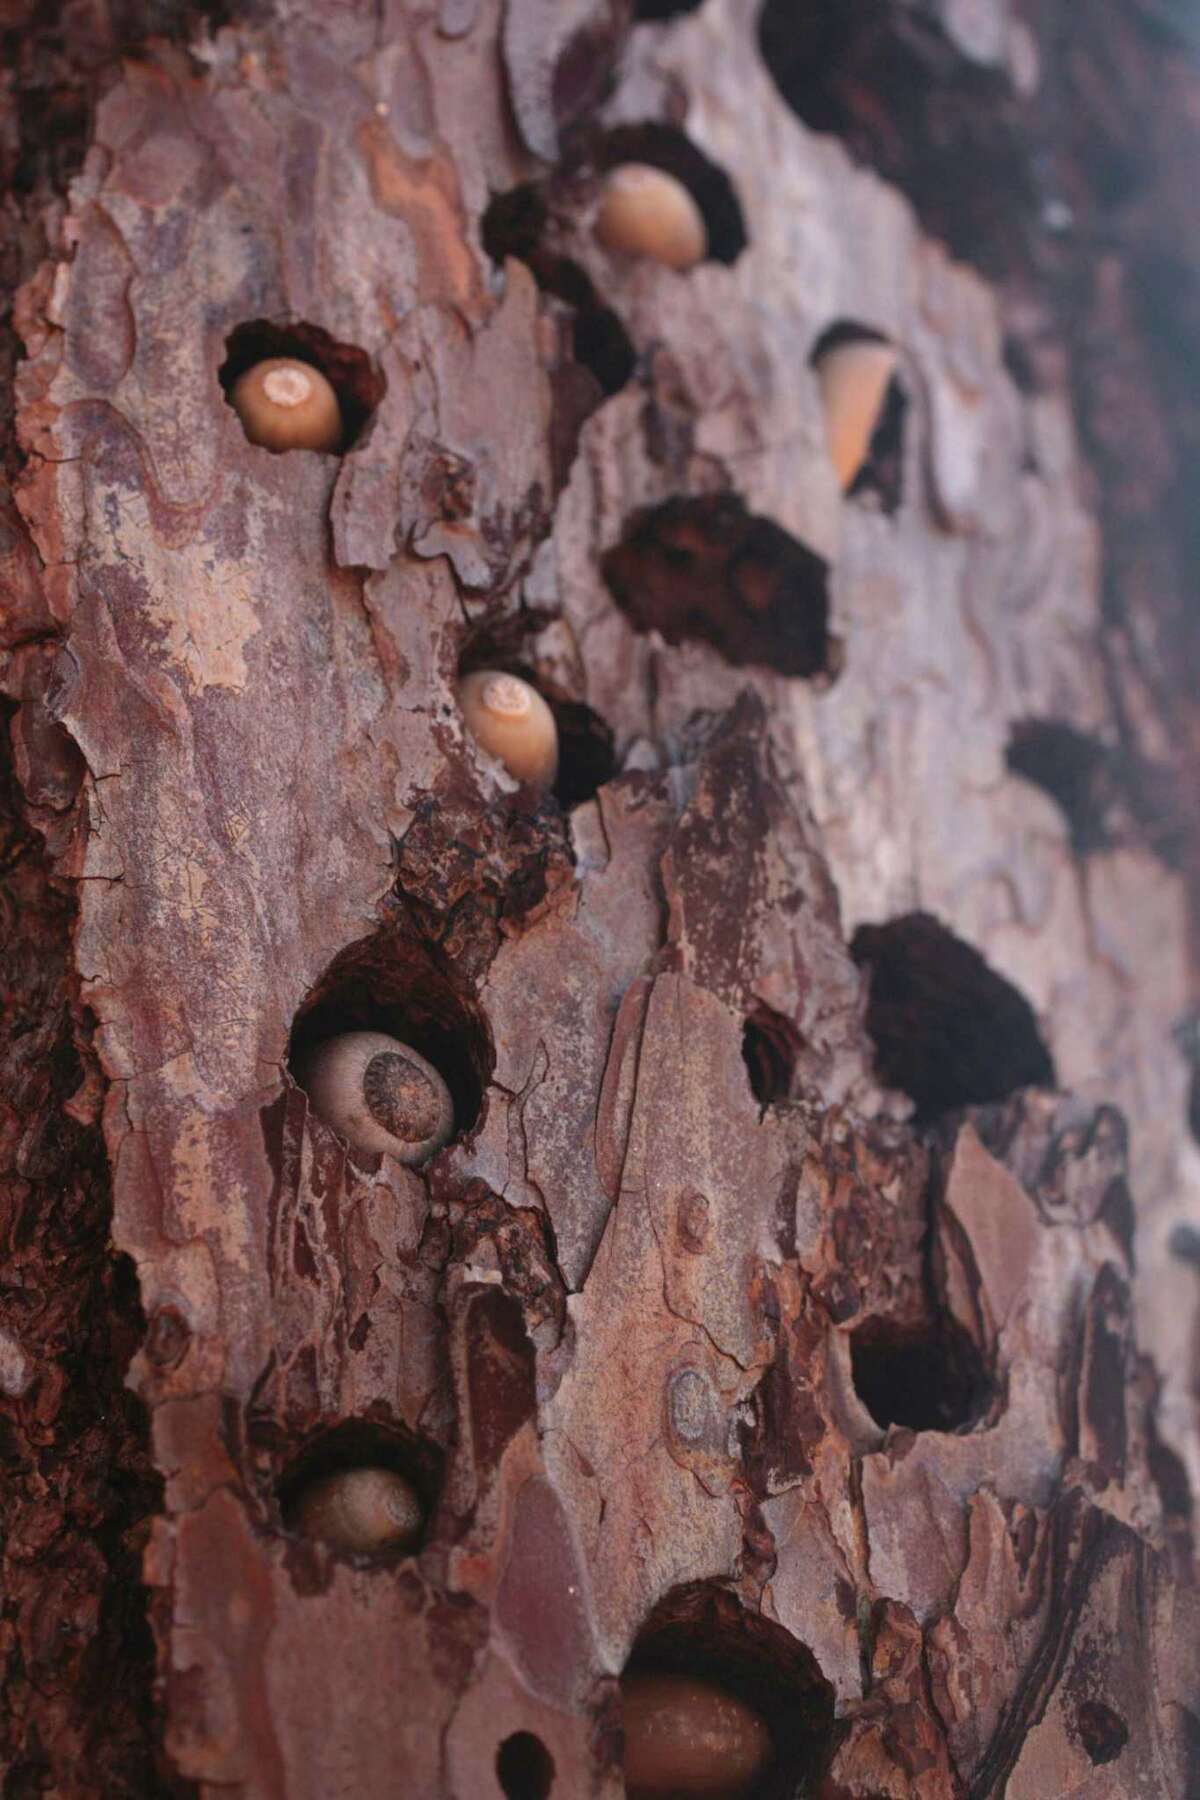 Acorns in a tree trunk in an area of Foss Valley that burned in last year’s Glass Fire.